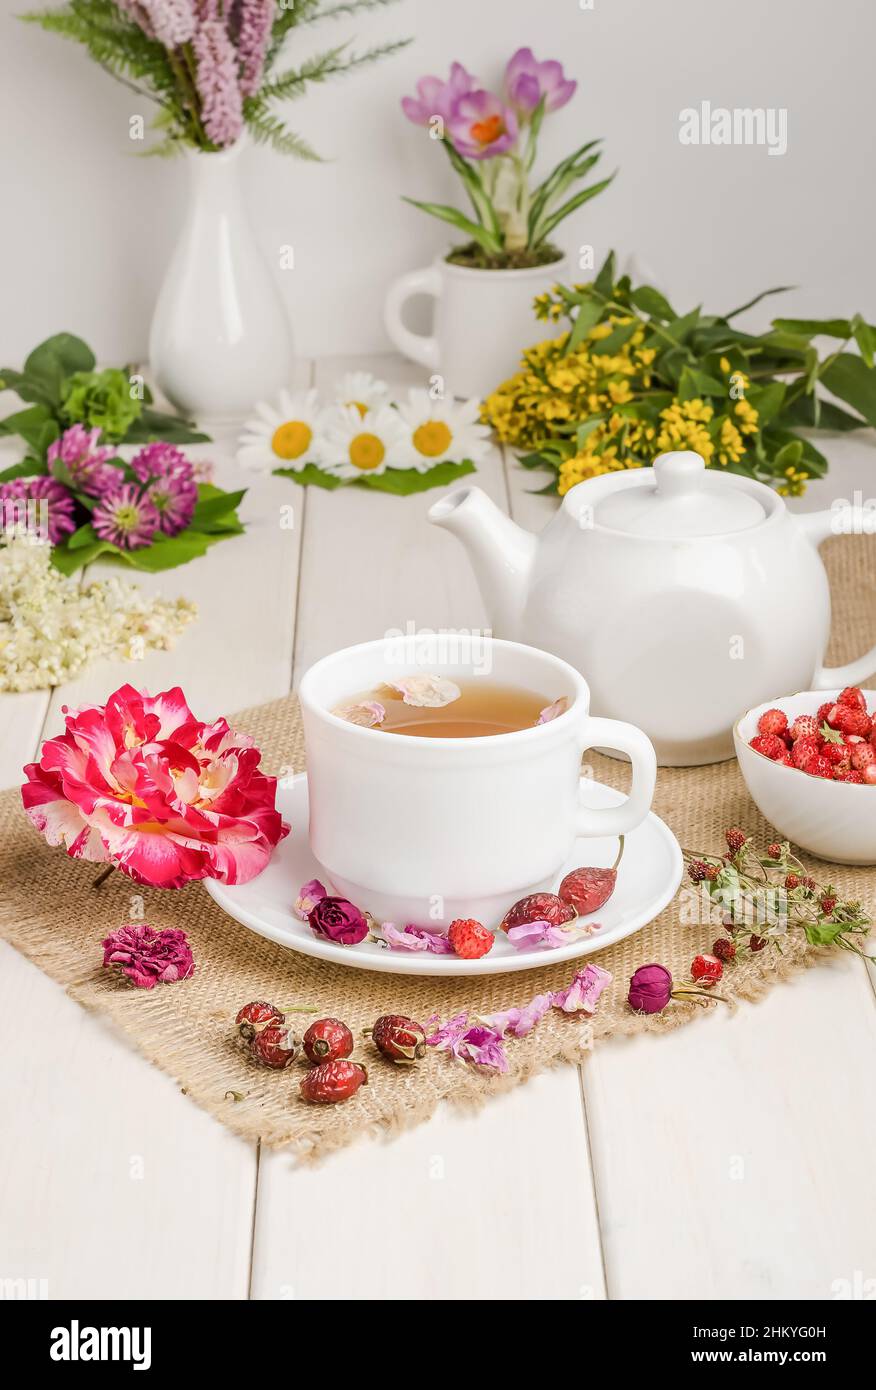 Herbal tea with rosehip, chamomile and meadowsweet in a white cup on a white wooden table with flowers. Stock Photo